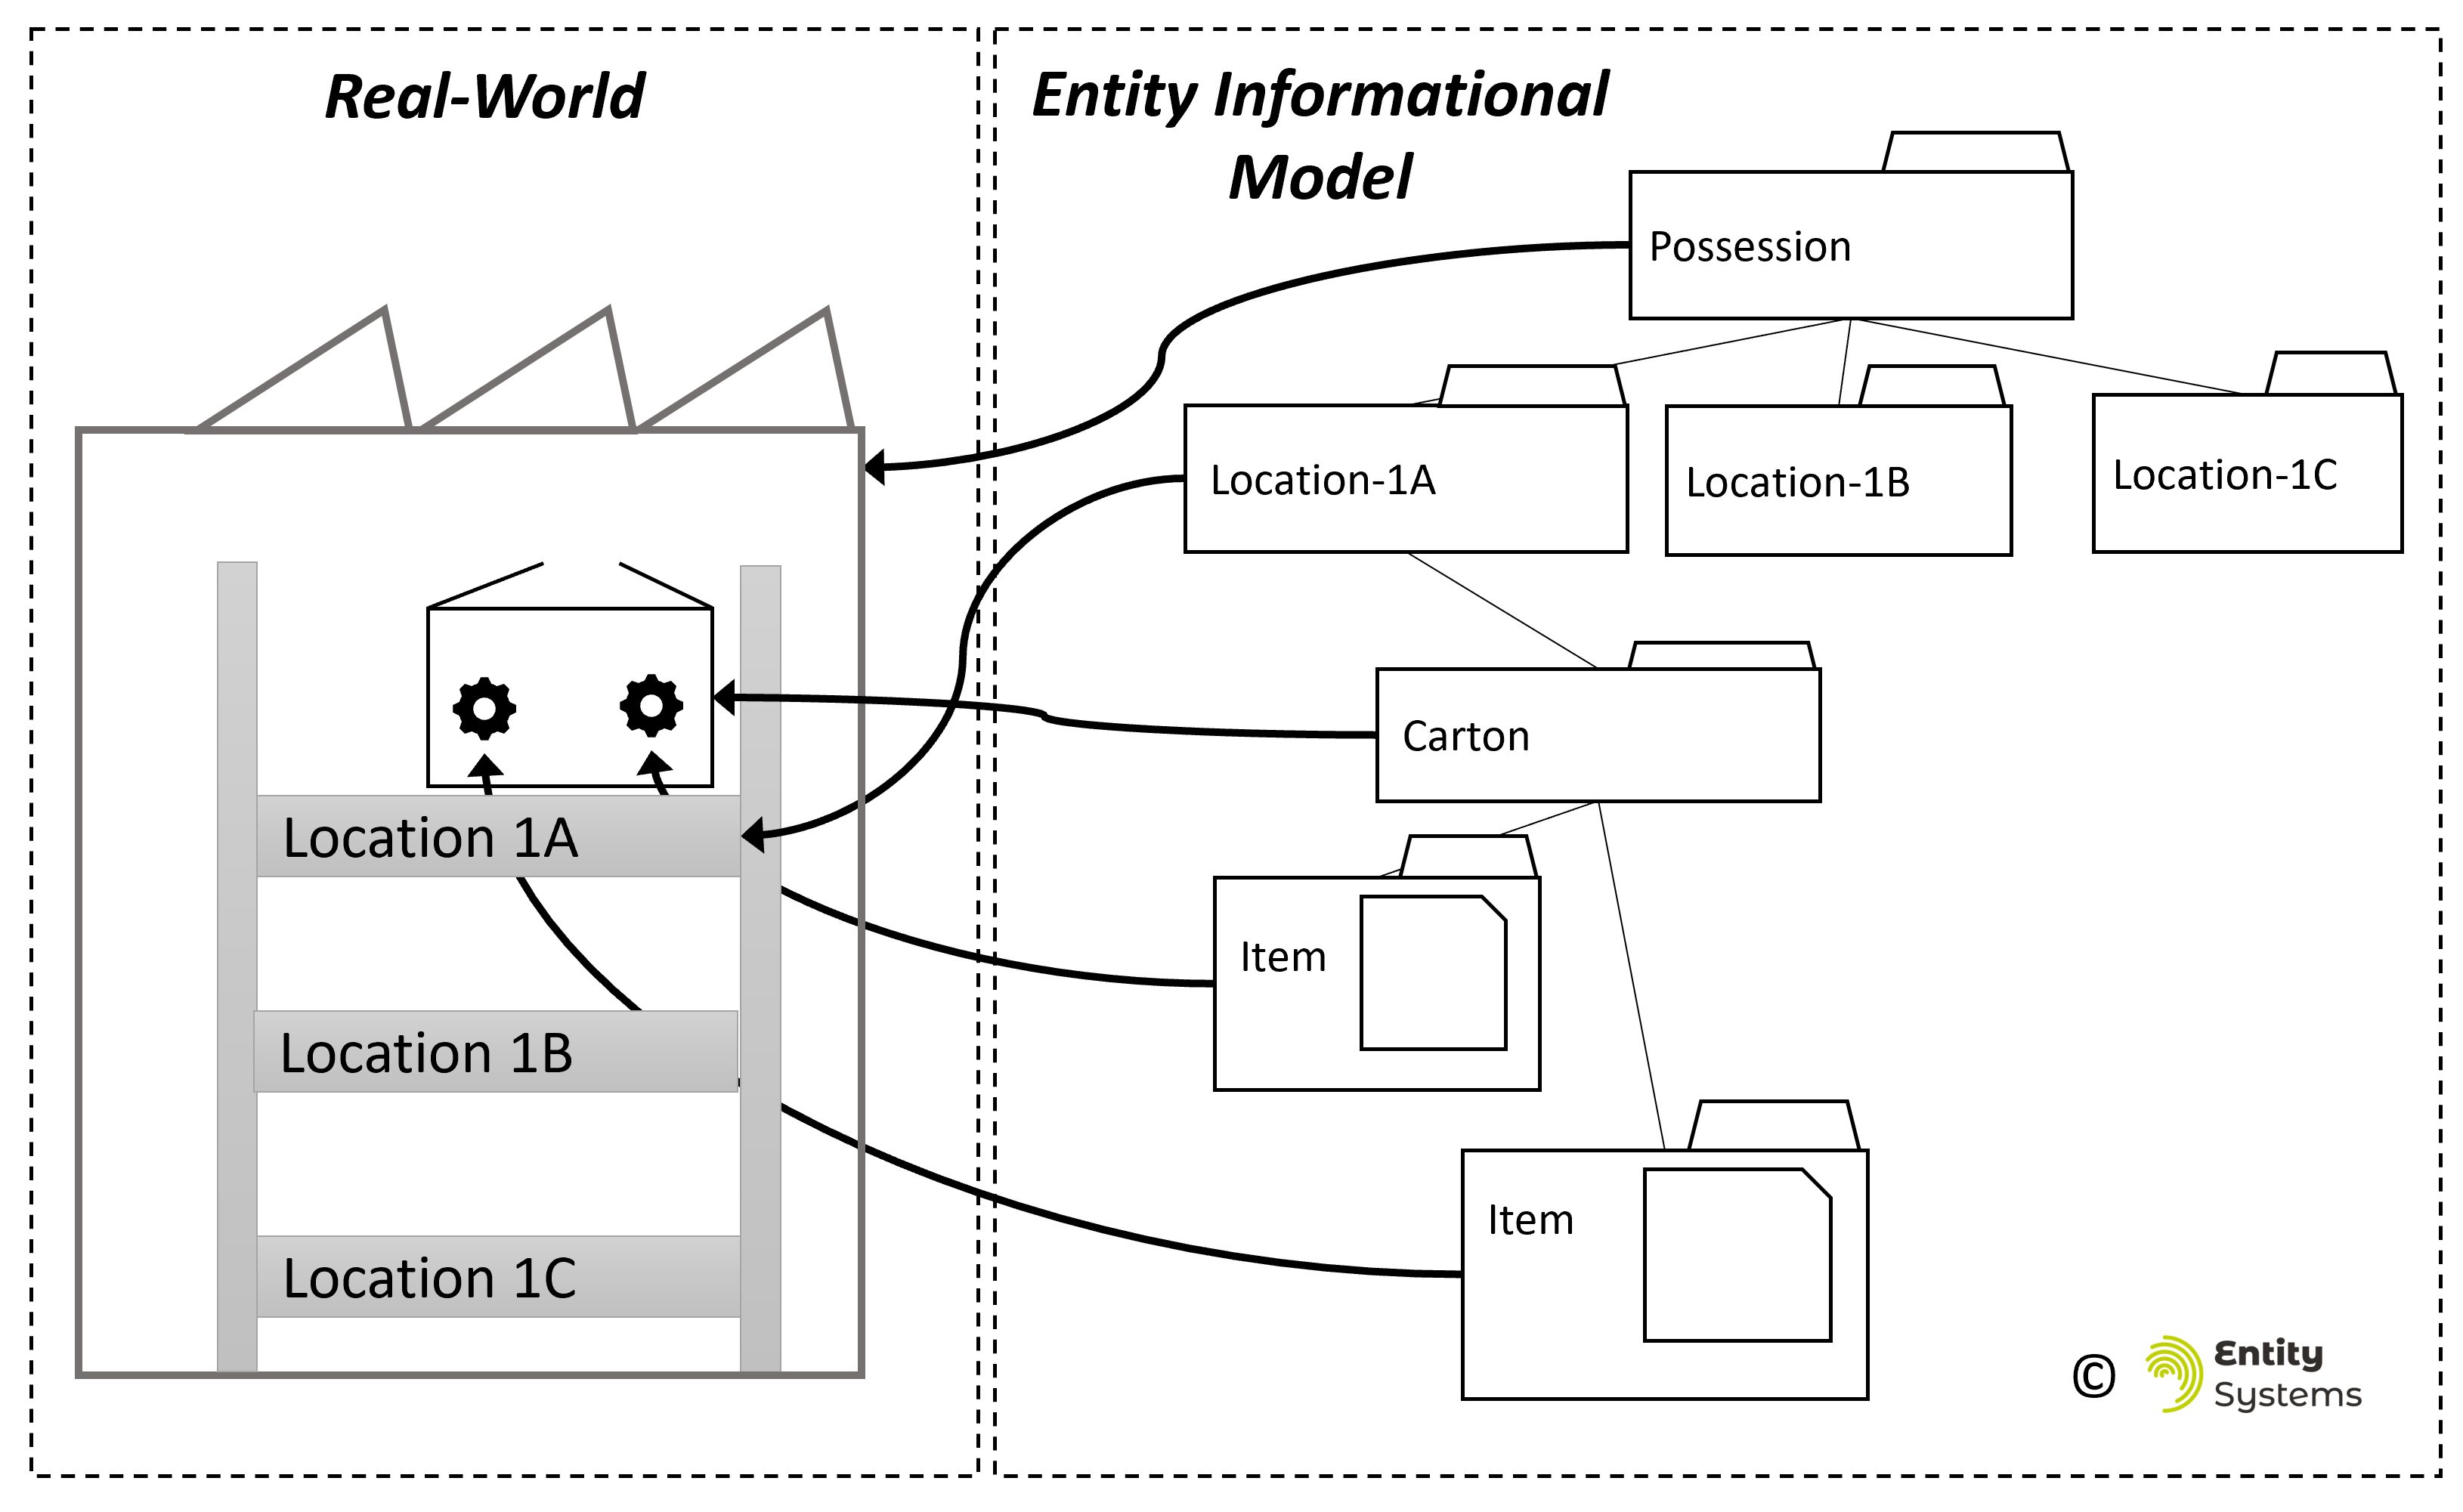 Depiction of a Real World Warehouse and shelf within that Warehouse and the corresponding Entity Management System Information Model